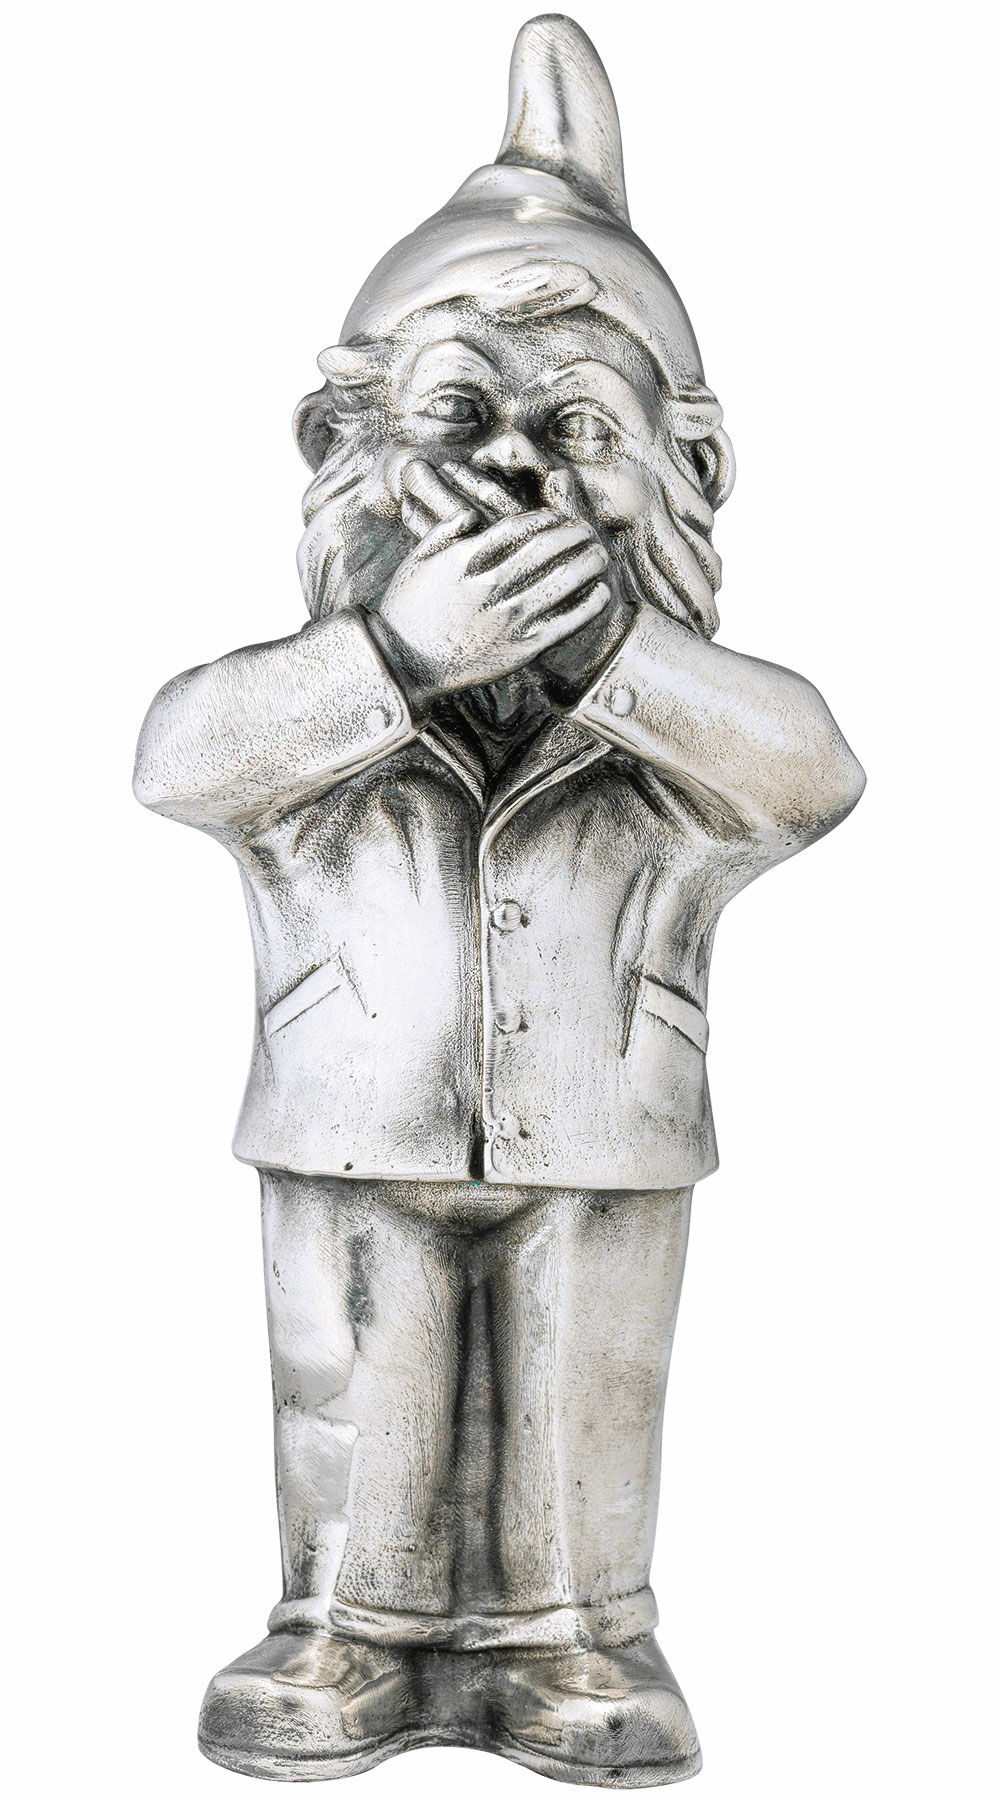 Sculpture "Bearer of Secrets - Say Nothing", silver-plated version by Ottmar Hörl